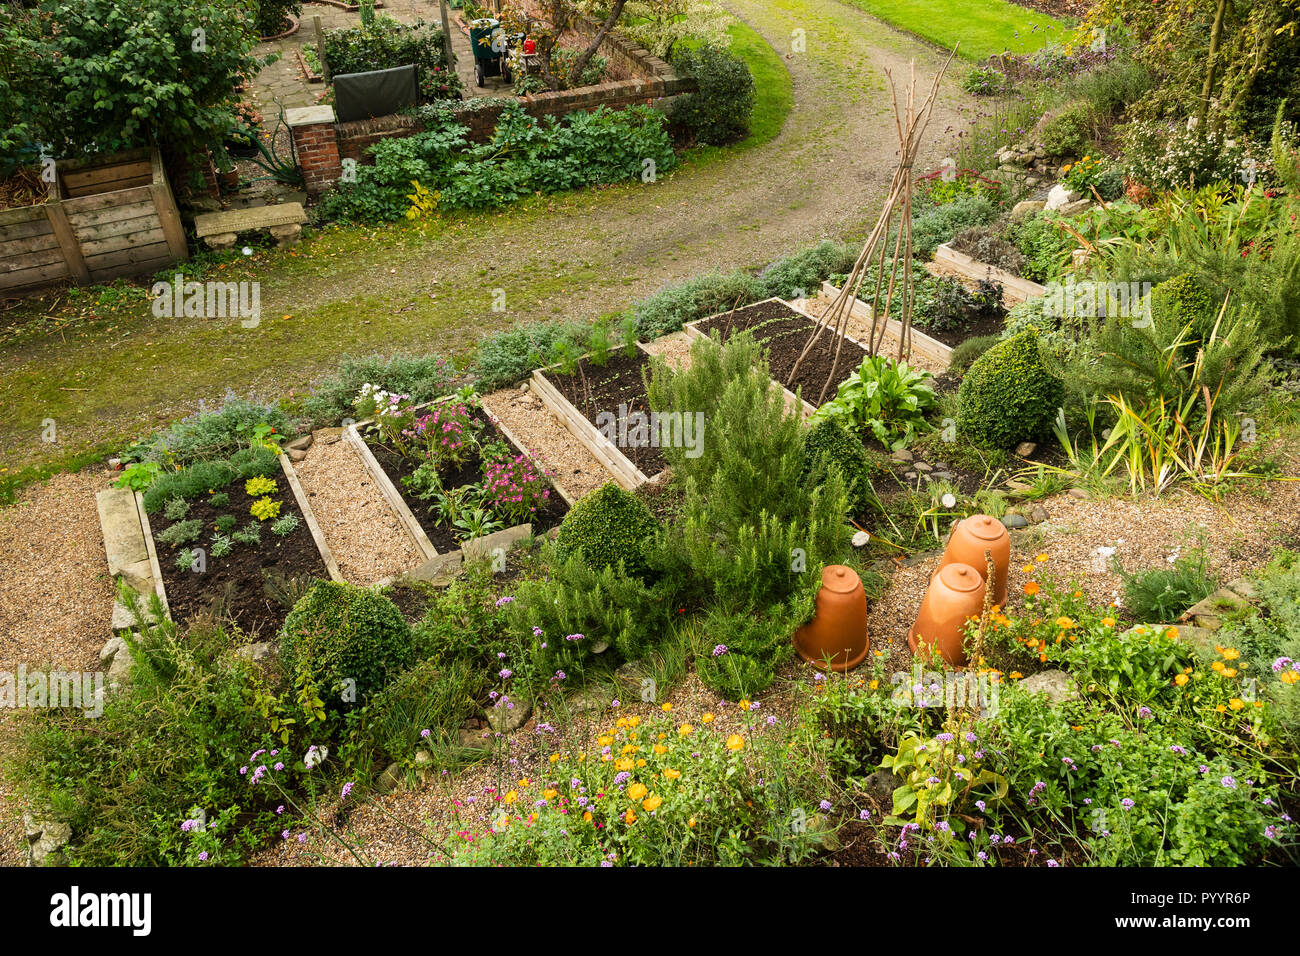 Raised timber beds with mixed organic crops or produce (vegetables herbs, edible flowers) in kitchen garden - Grays Court, York, Yorkshire, England. Stock Photo